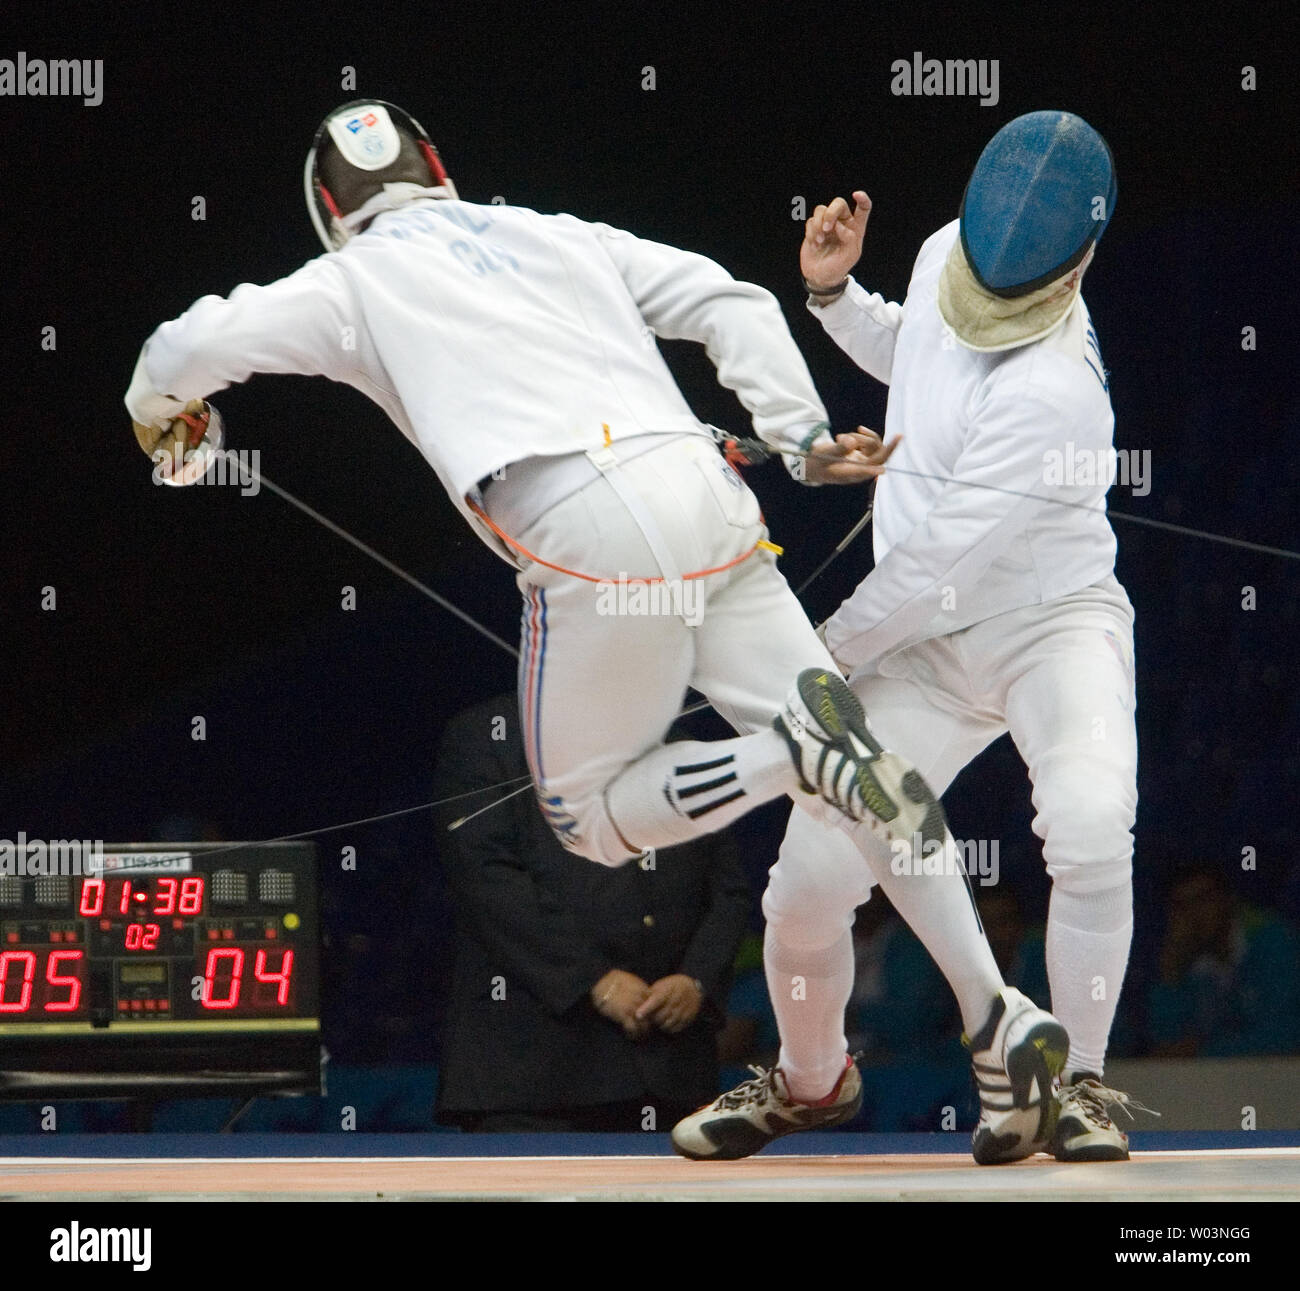 Cuba's Adres Carrillo lunges away from the blade of Venezuela's Reuben Limardo (R) in the gold medal match of men's individual epee at Riocentro during the 2007 Pan Am Games in Rio de Janeiro, Brazil on July 16, 2007. Limardo went on to win gold, beating Carrillo 11-10 in overtime.  (UPI Photo/Heinz Ruckemann) Stock Photo